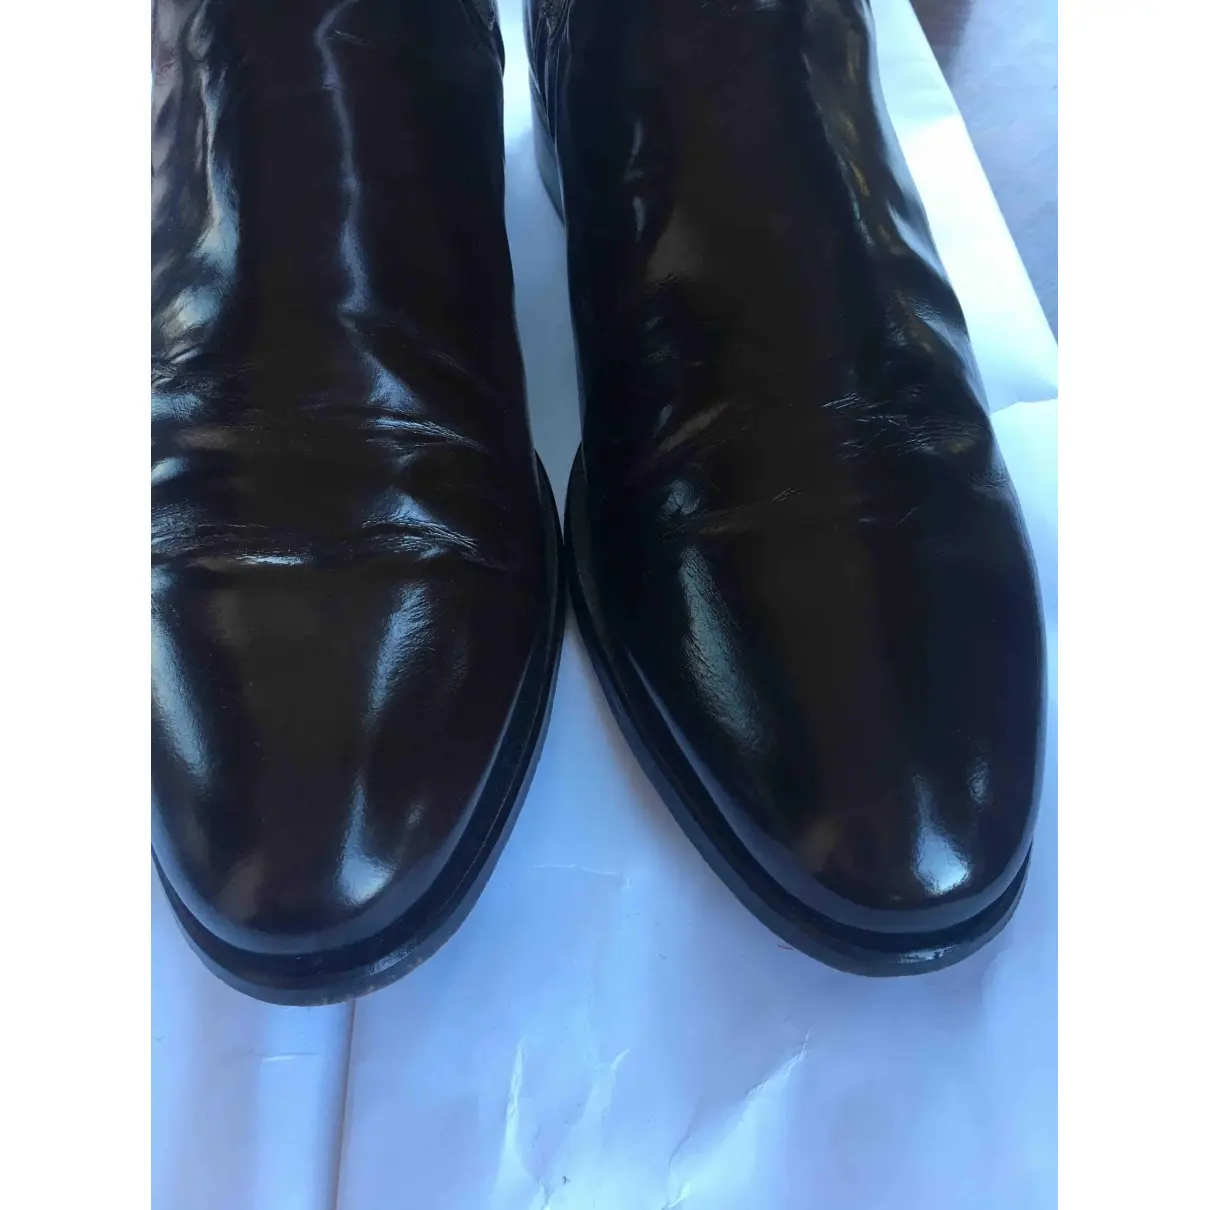 Pollini Leather boots for sale